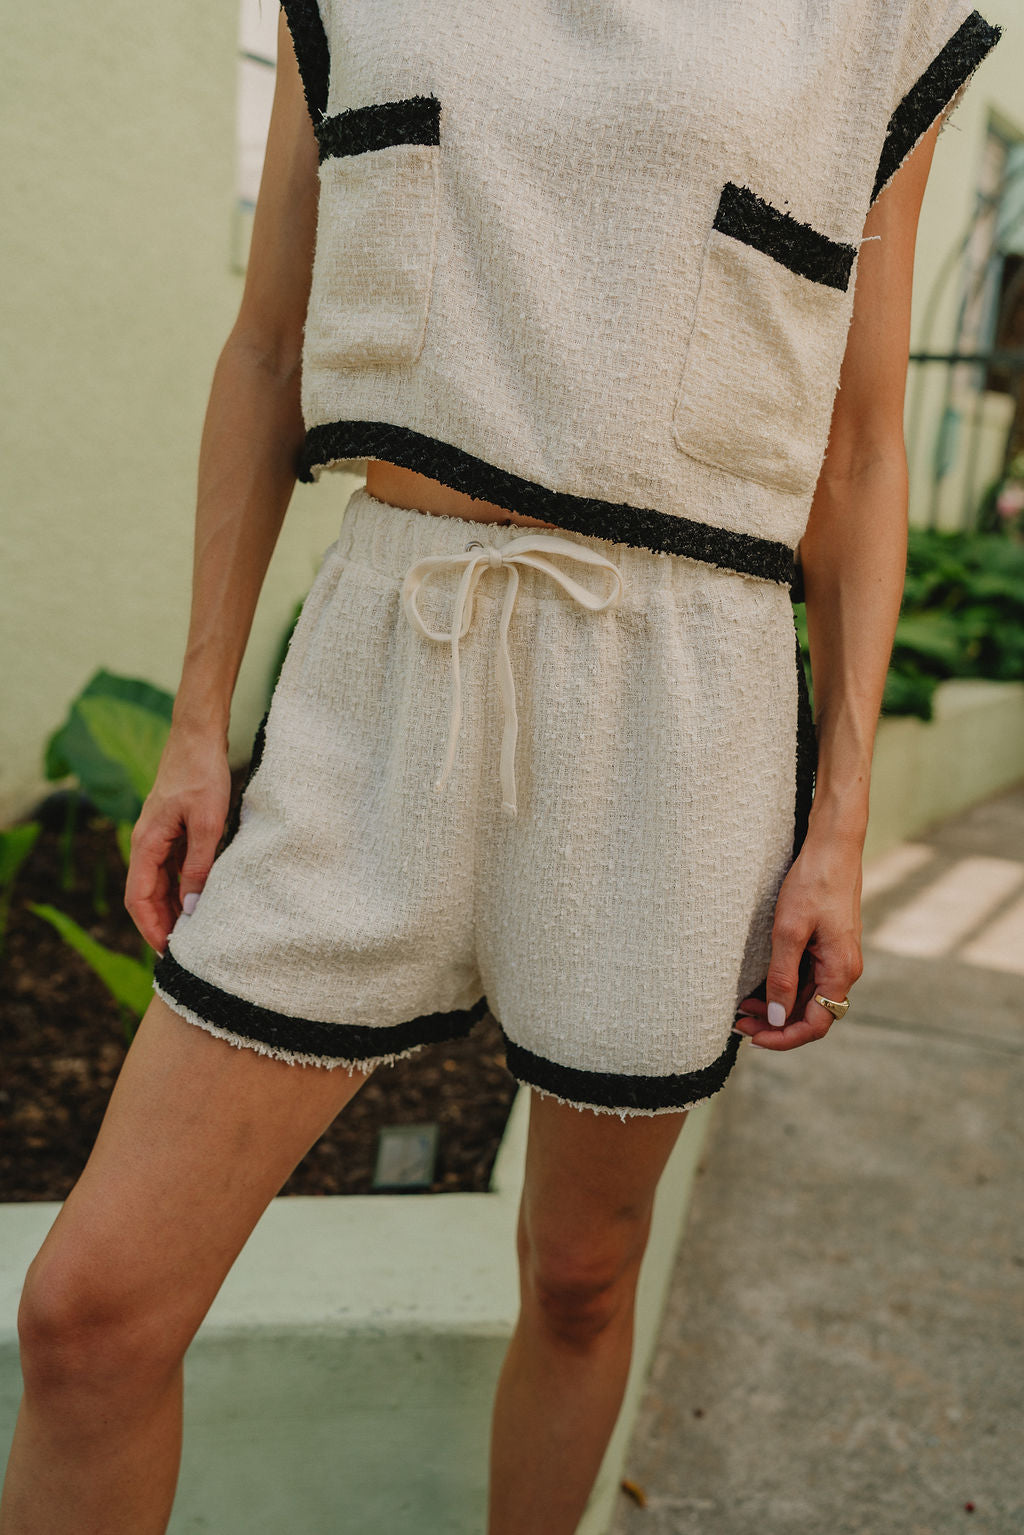 front view of female model wearing the Emery Cream & Black Shorts which features Cream Textured Fabric, Black Trim Details and Elastic Waistband with Drawstring Ties